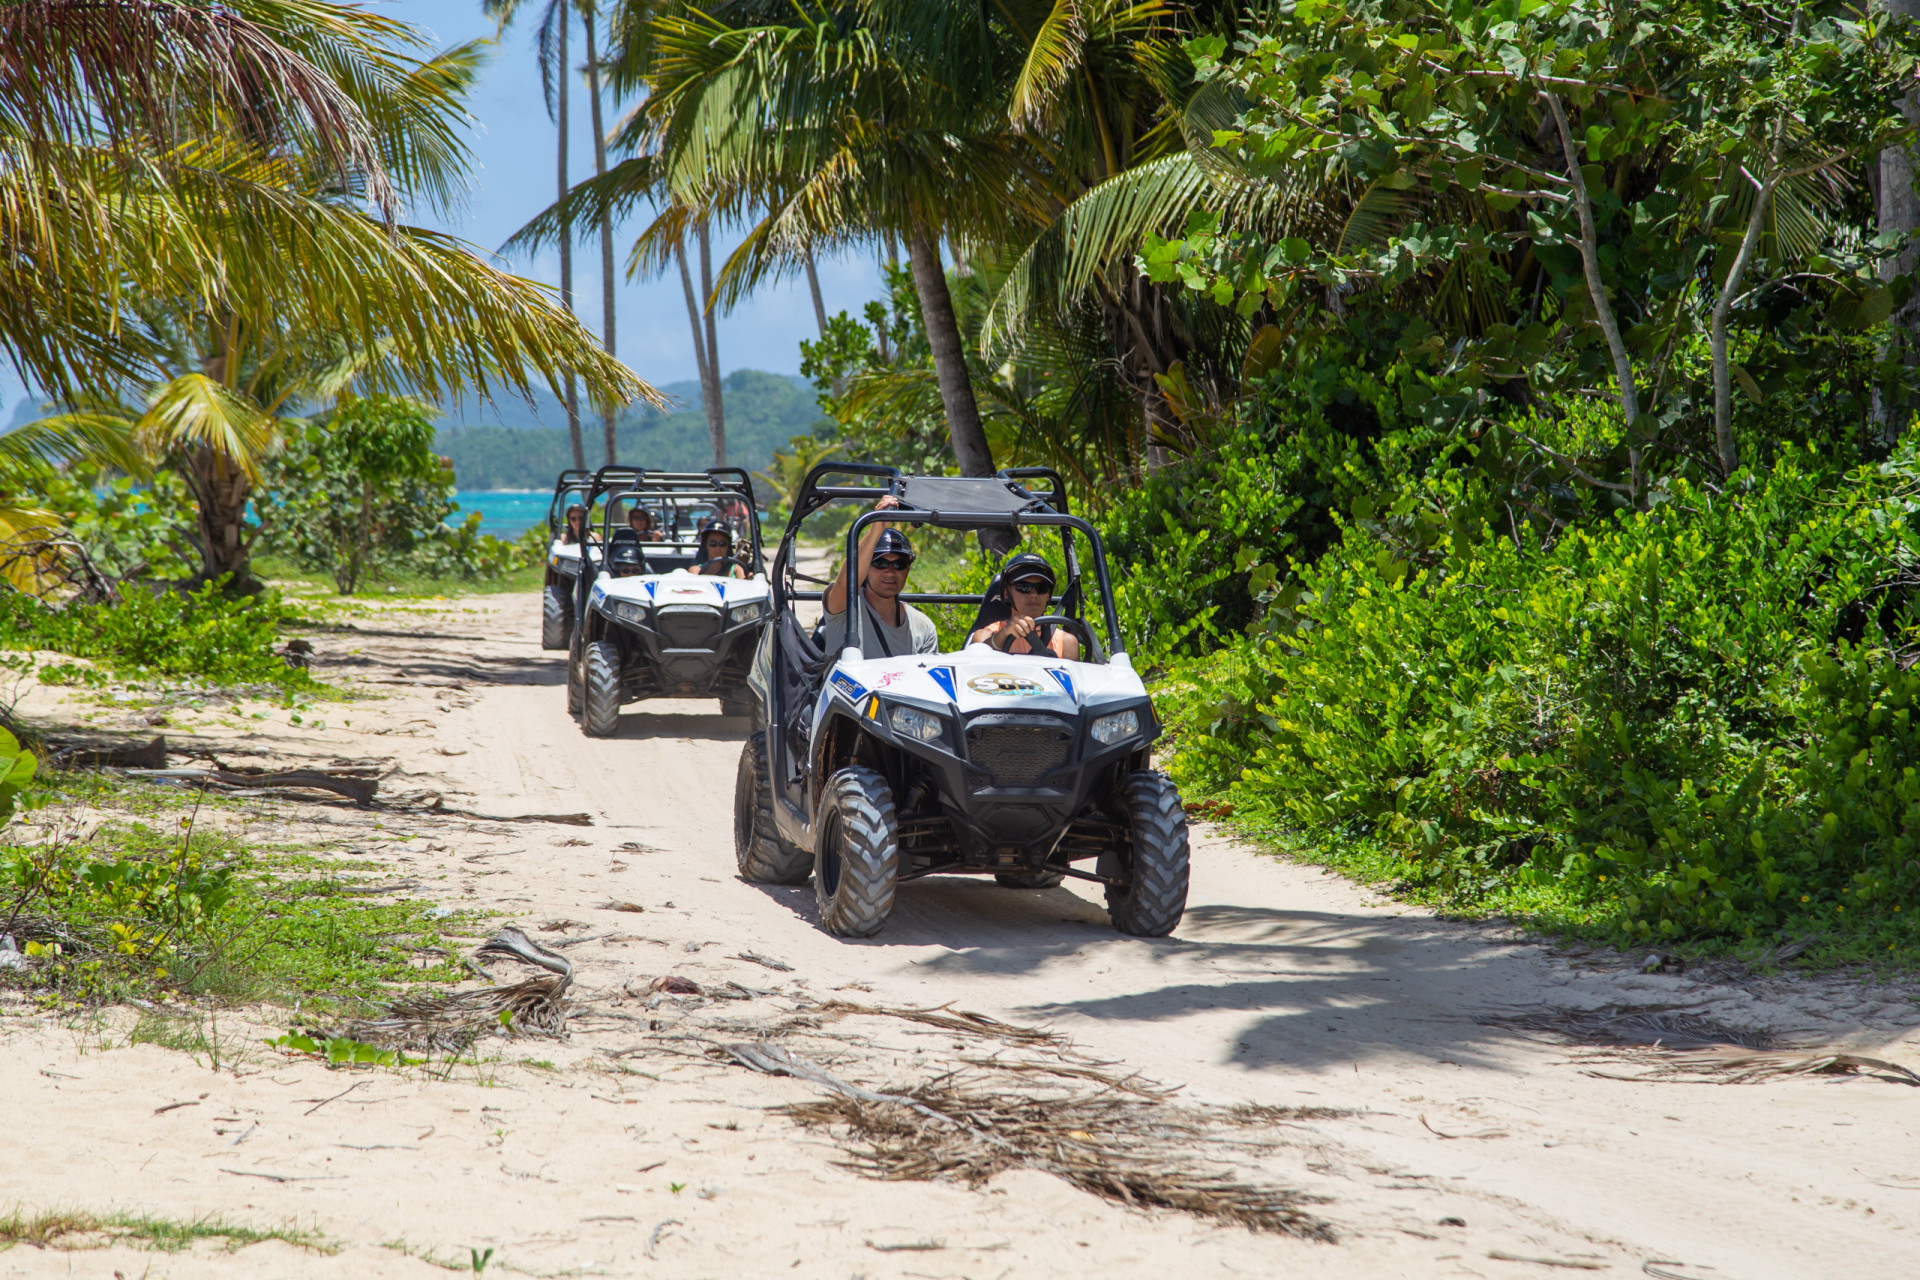 <p>Physically leaving the resort takes you out of the all-inclusive zone and, unless they are included in the package, activities like jeep excursions, for example, will likely cost extra.</p><p><a href="https://www.msn.com/en-us/community/channel/vid-7xx8mnucu55yw63we9va2gwr7uihbxwc68fxqp25x6tg4ftibpra?cvid=94631541bc0f4f89bfd59158d696ad7e">Follow us and access great exclusive content every day</a></p>